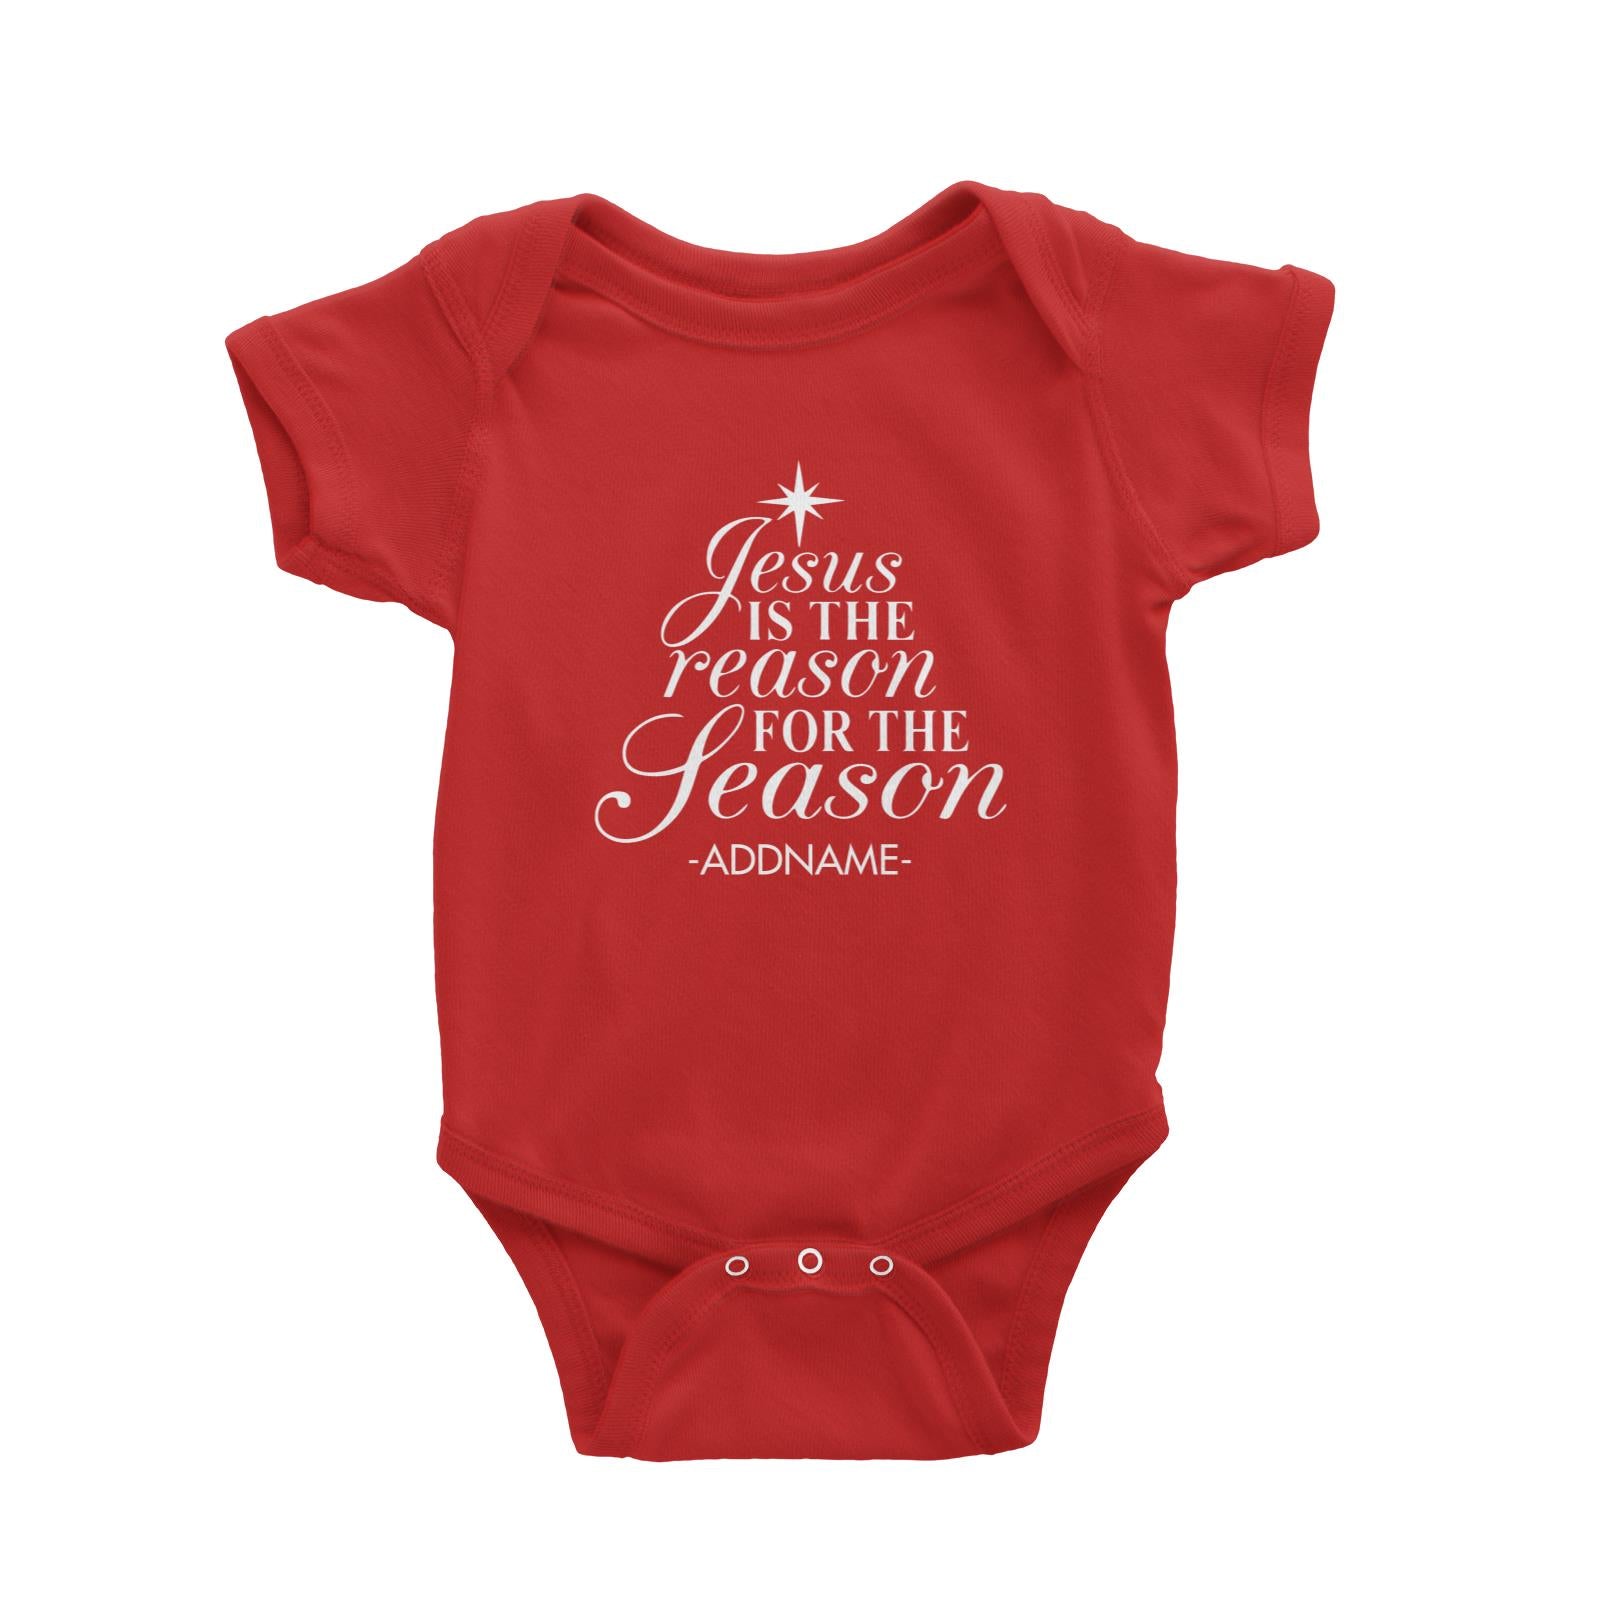 Jesus Is The Reason For The Season Addname Baby Romper Christmas Personalizable Designs Lettering